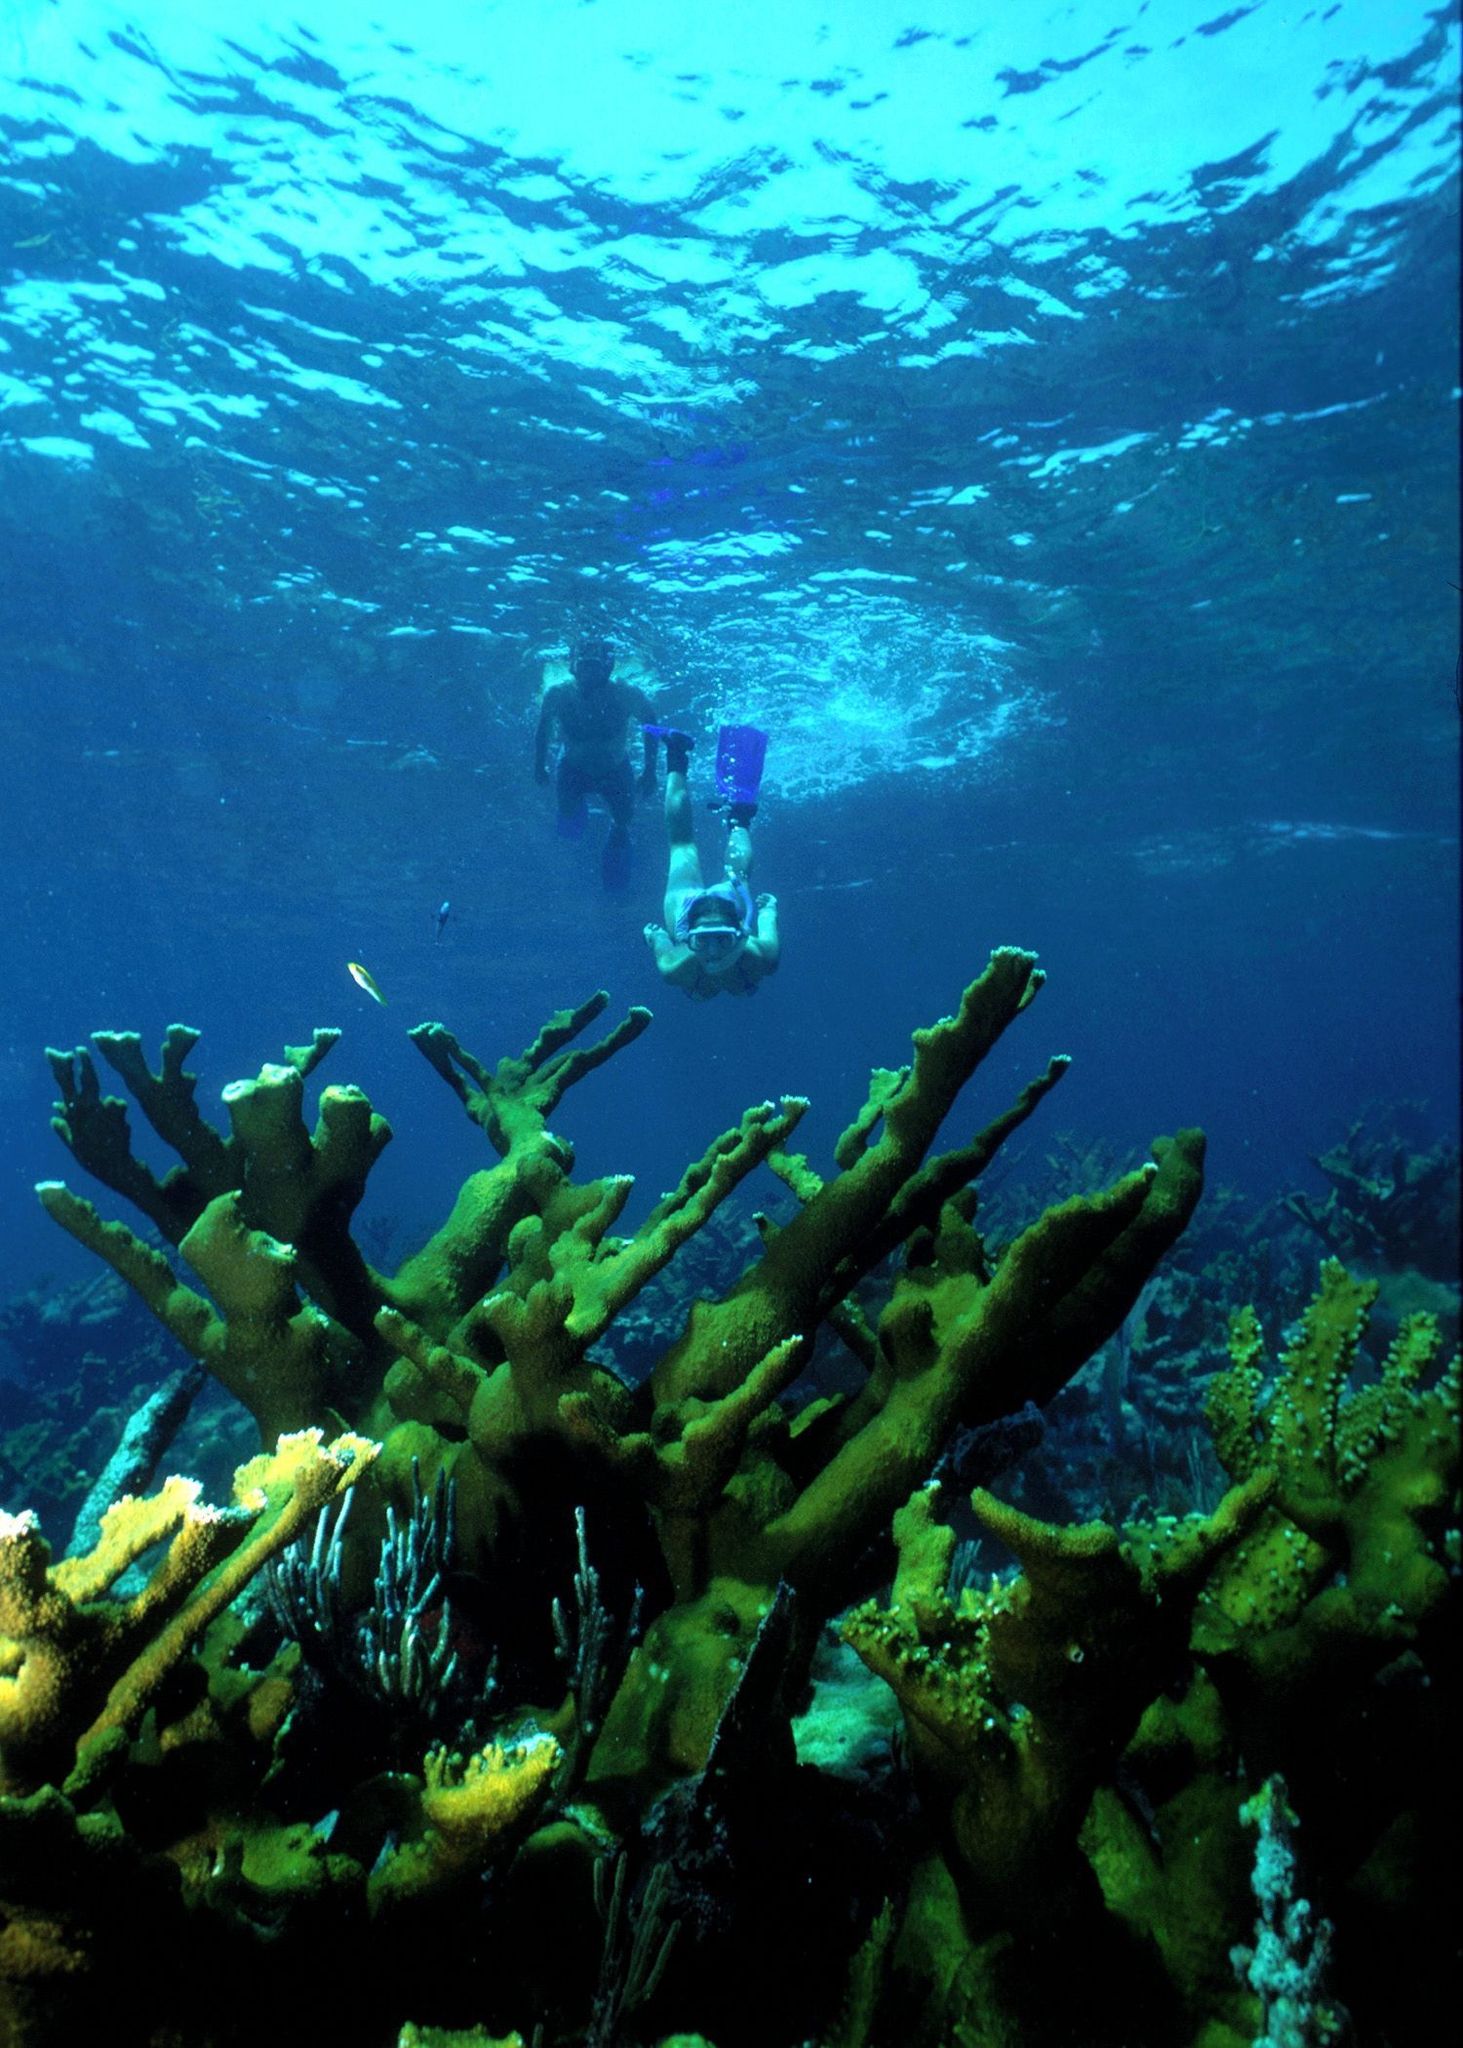 Snorkeling is a great way to explore the coral reefs in the park